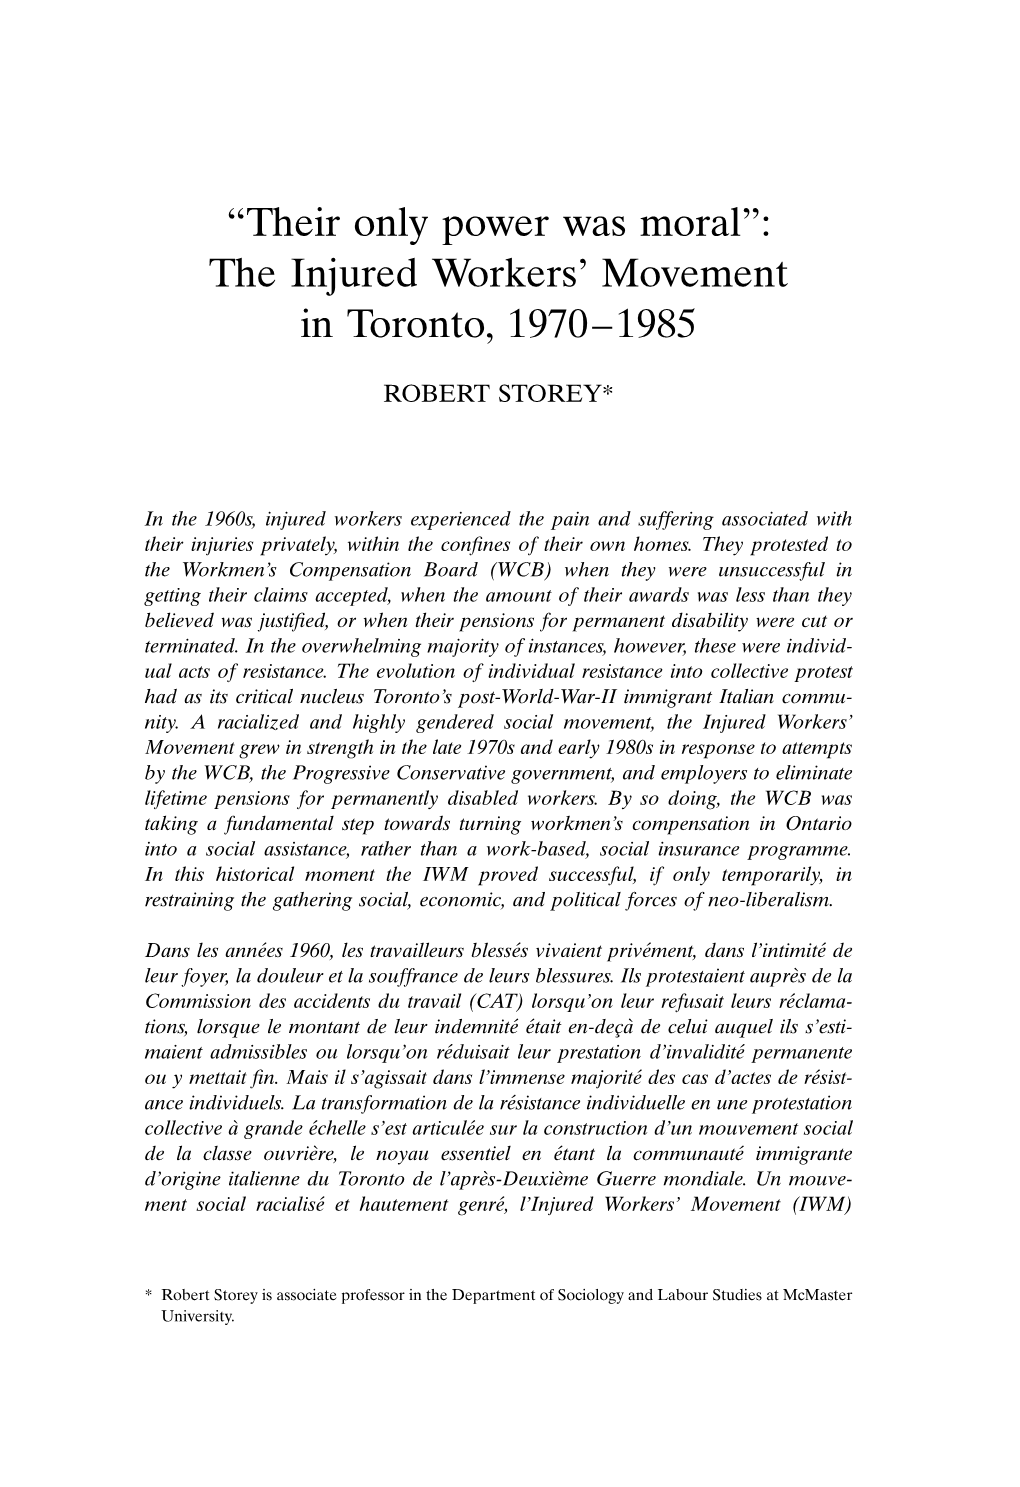 The Injured Workers' Movement in Toronto, 1970–1985